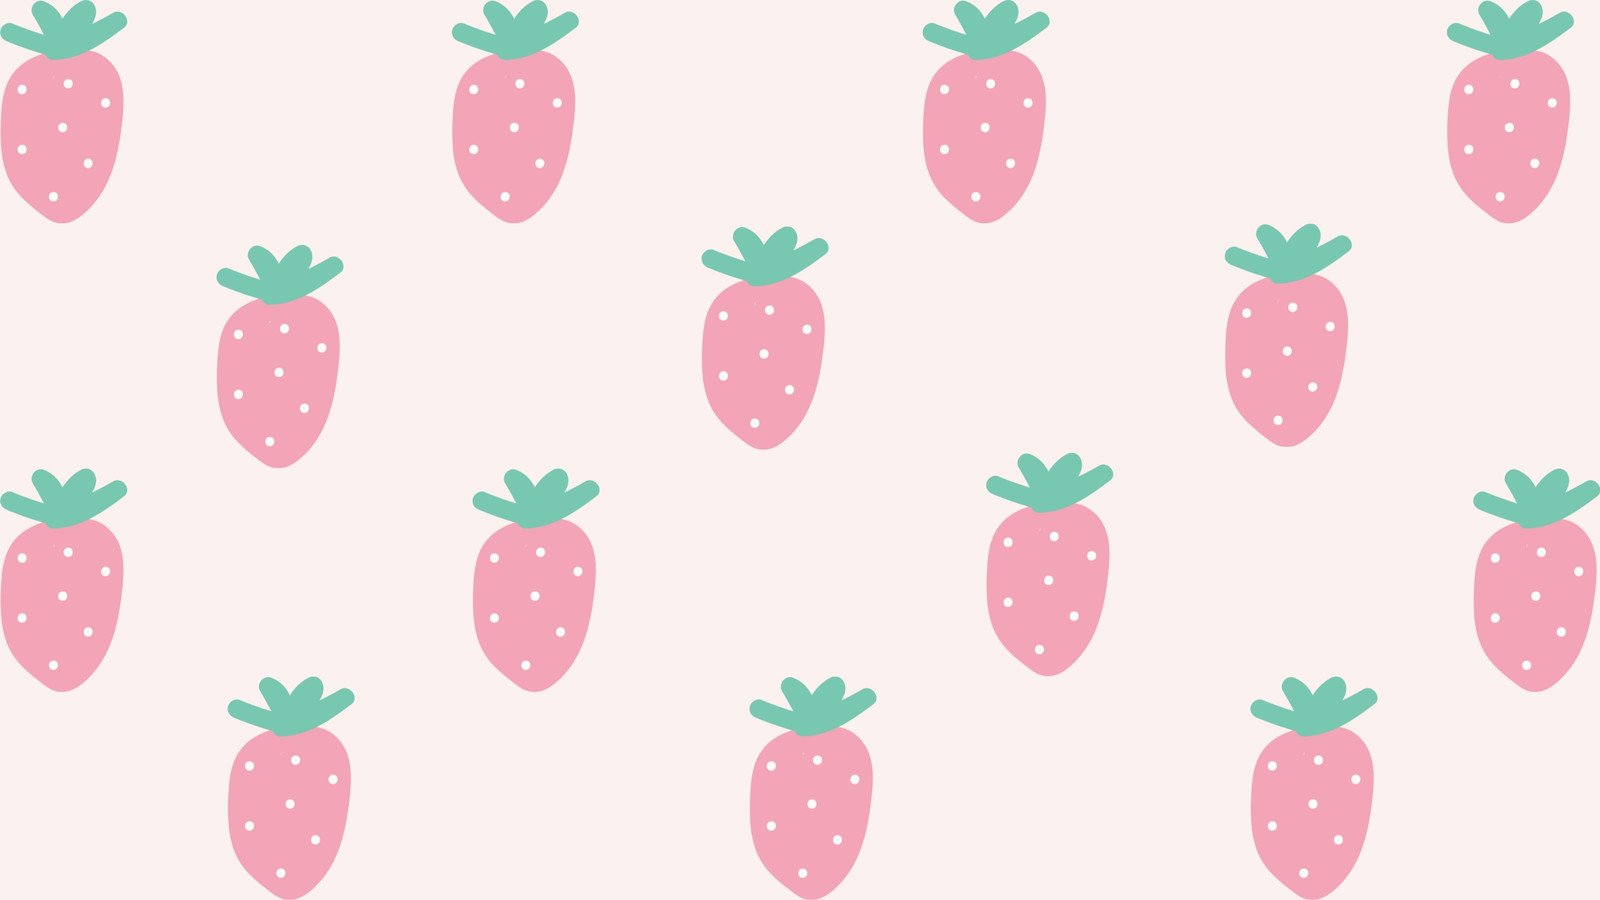 291586 Pink Strawberry Background Images Stock Photos  Vectors   Shutterstock